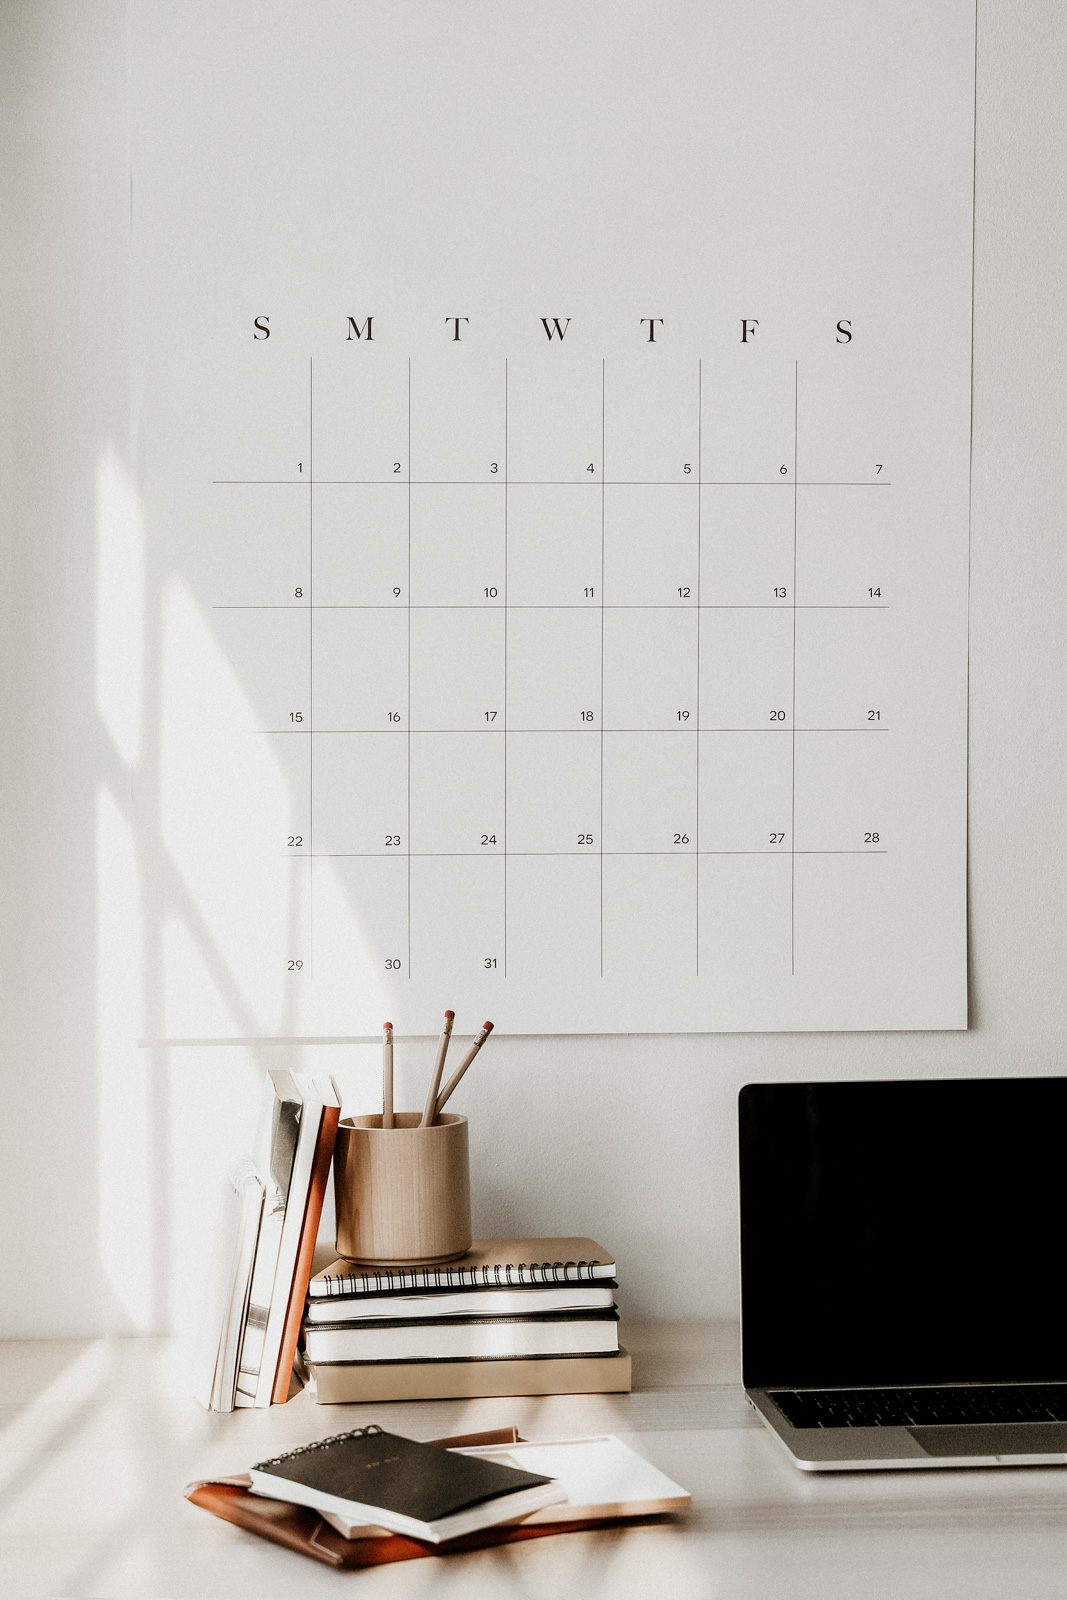 Wall calendar to schedule professional and personal prioritites